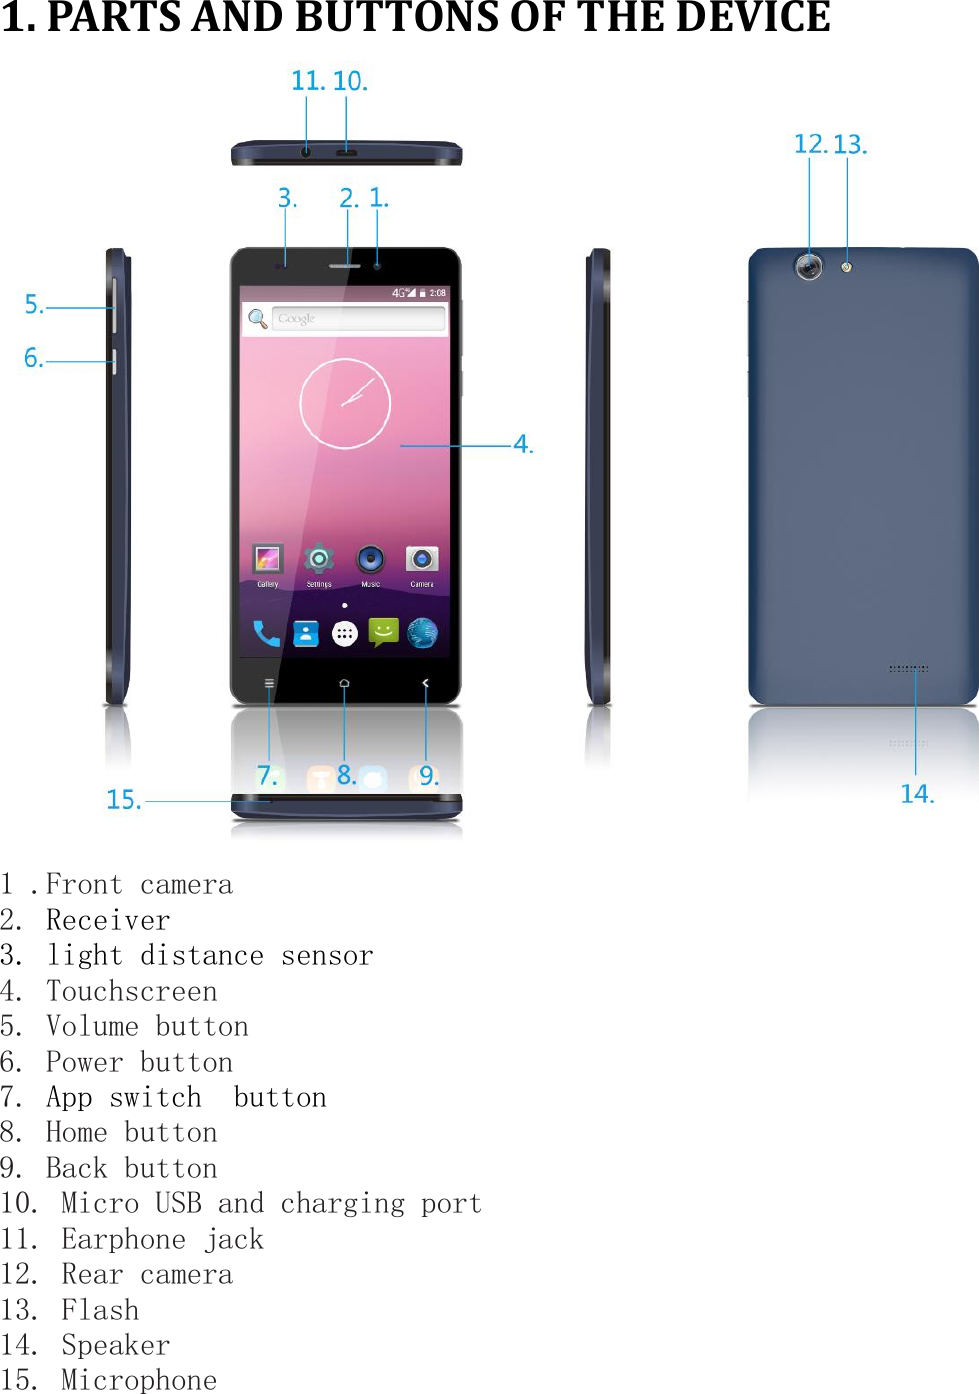 1. PARTS AND BUTTONS OF THE DEVICE  1 .Front camera 2. Receiver 3. light distance sensor 4. Touchscreen 5. Volume button 6. Power button 7. App switch  button 8. Home button 9. Back button 10. Micro USB and charging port 11. Earphone jack   12. Rear camera 13. Flash 14. Speaker 15. Microphone 